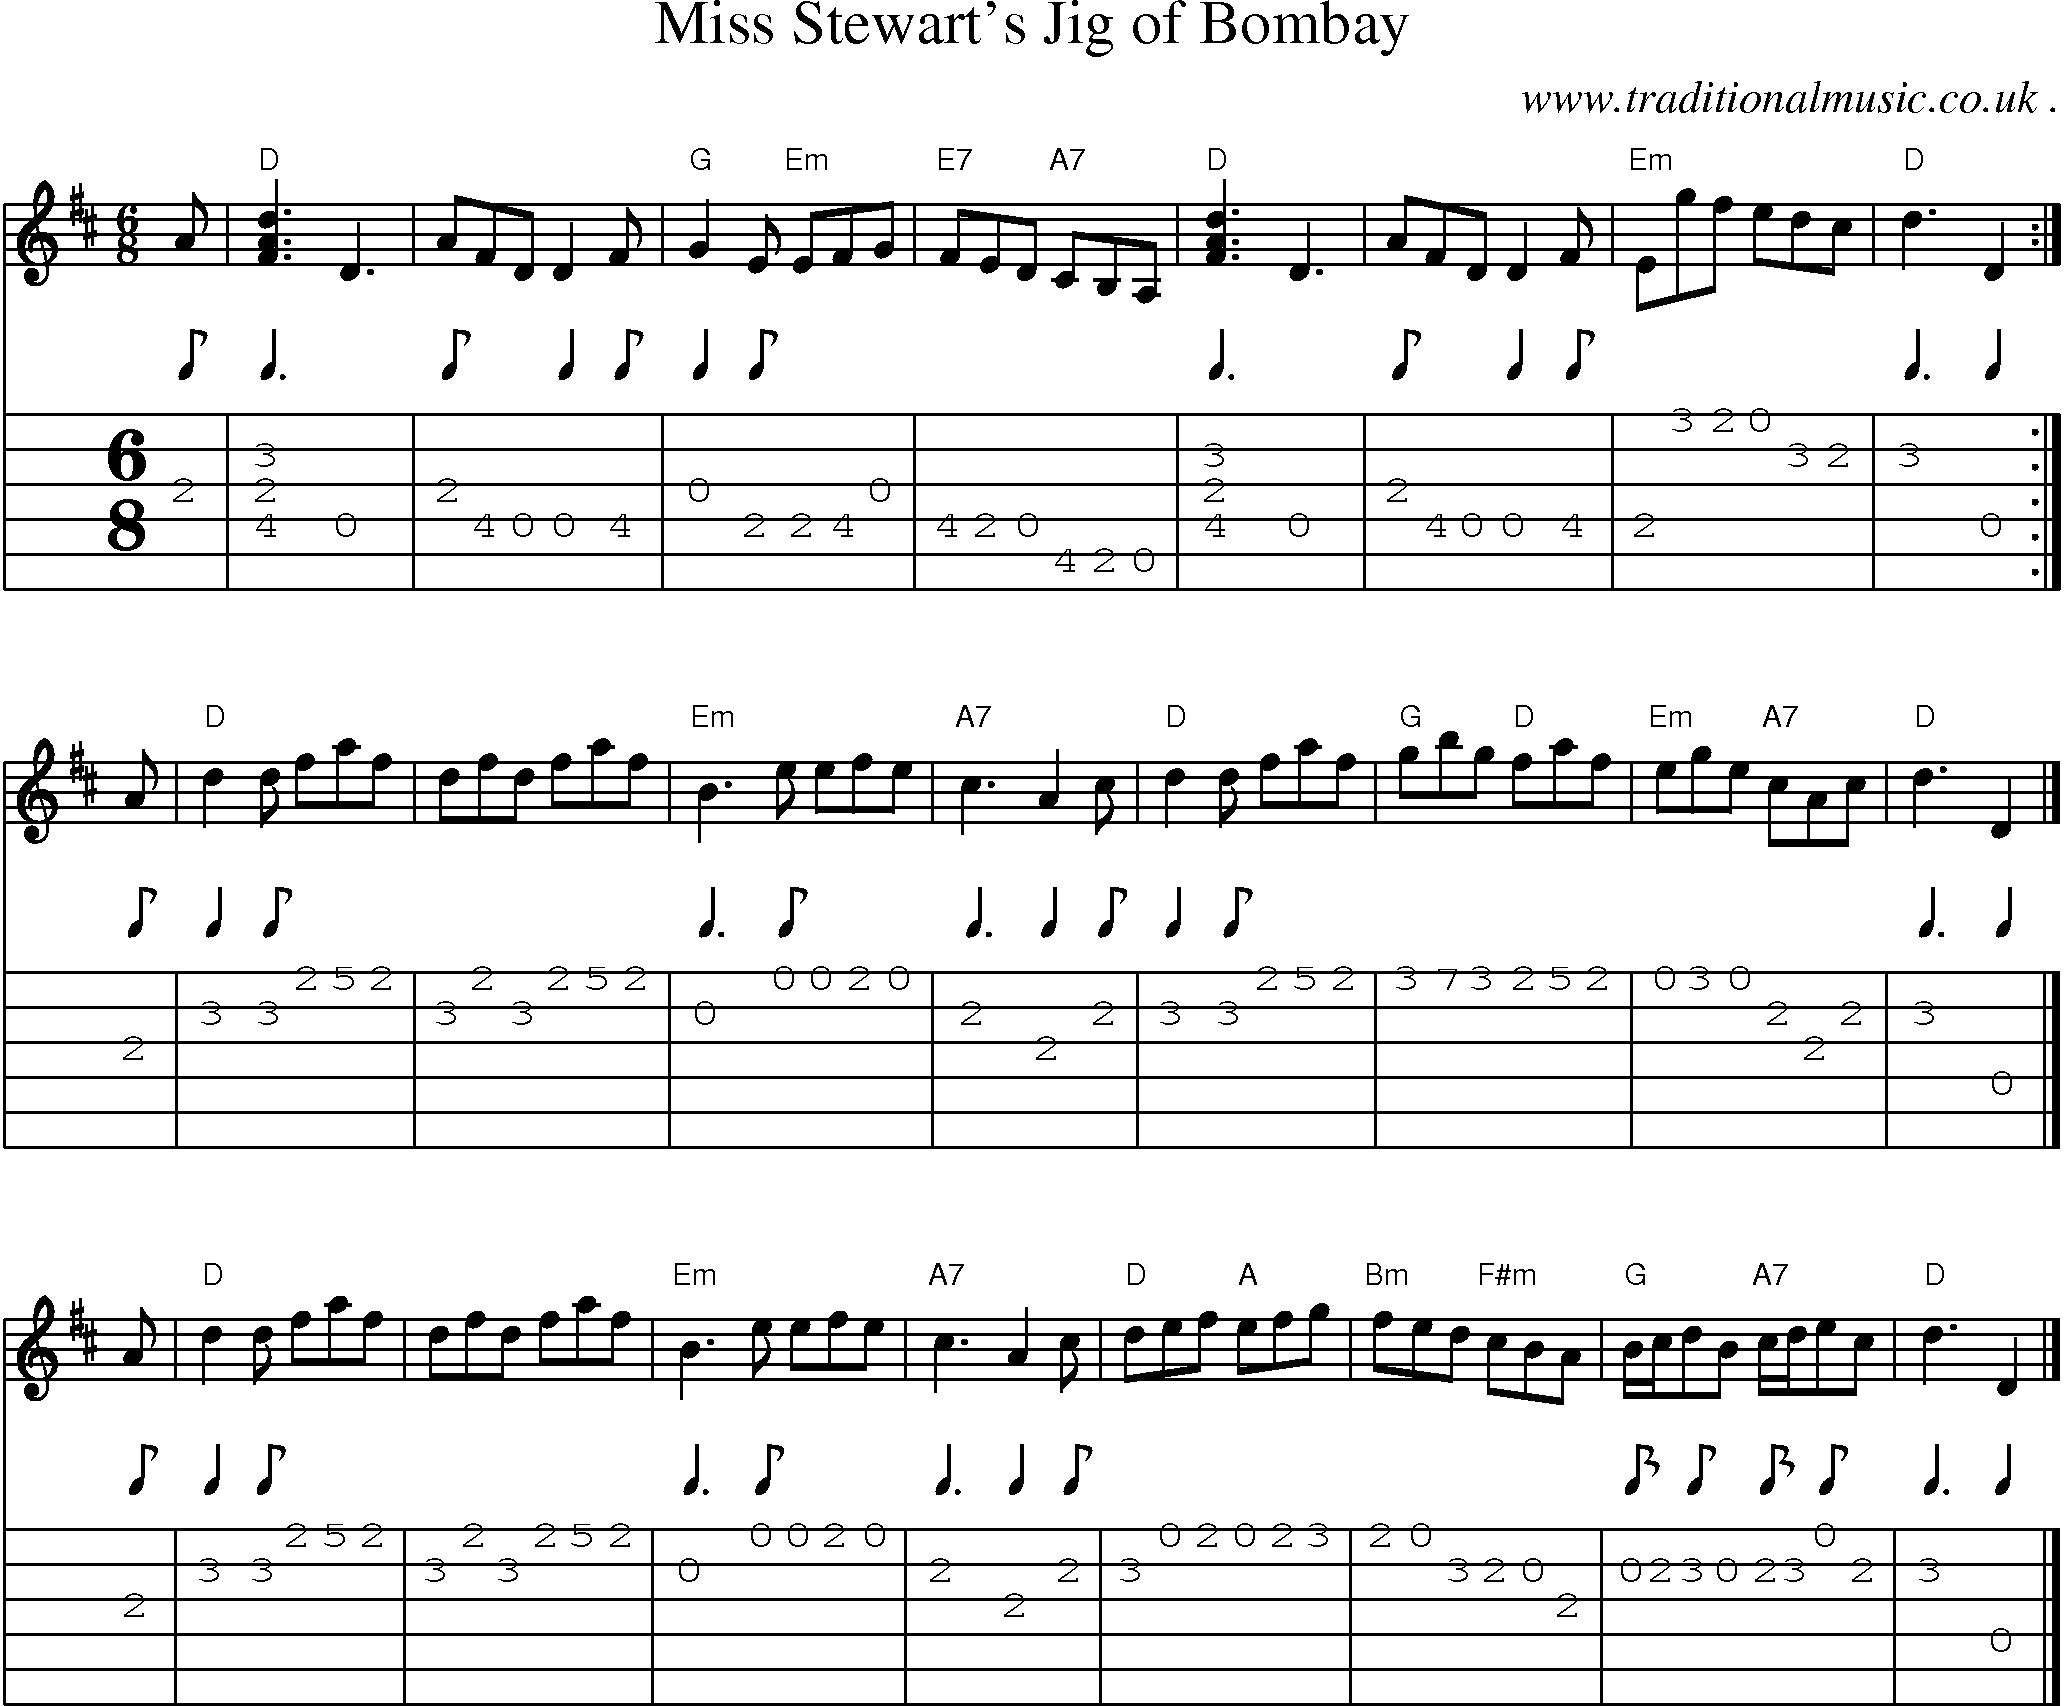 Sheet-music  score, Chords and Guitar Tabs for Miss Stewarts Jig Of Bombay